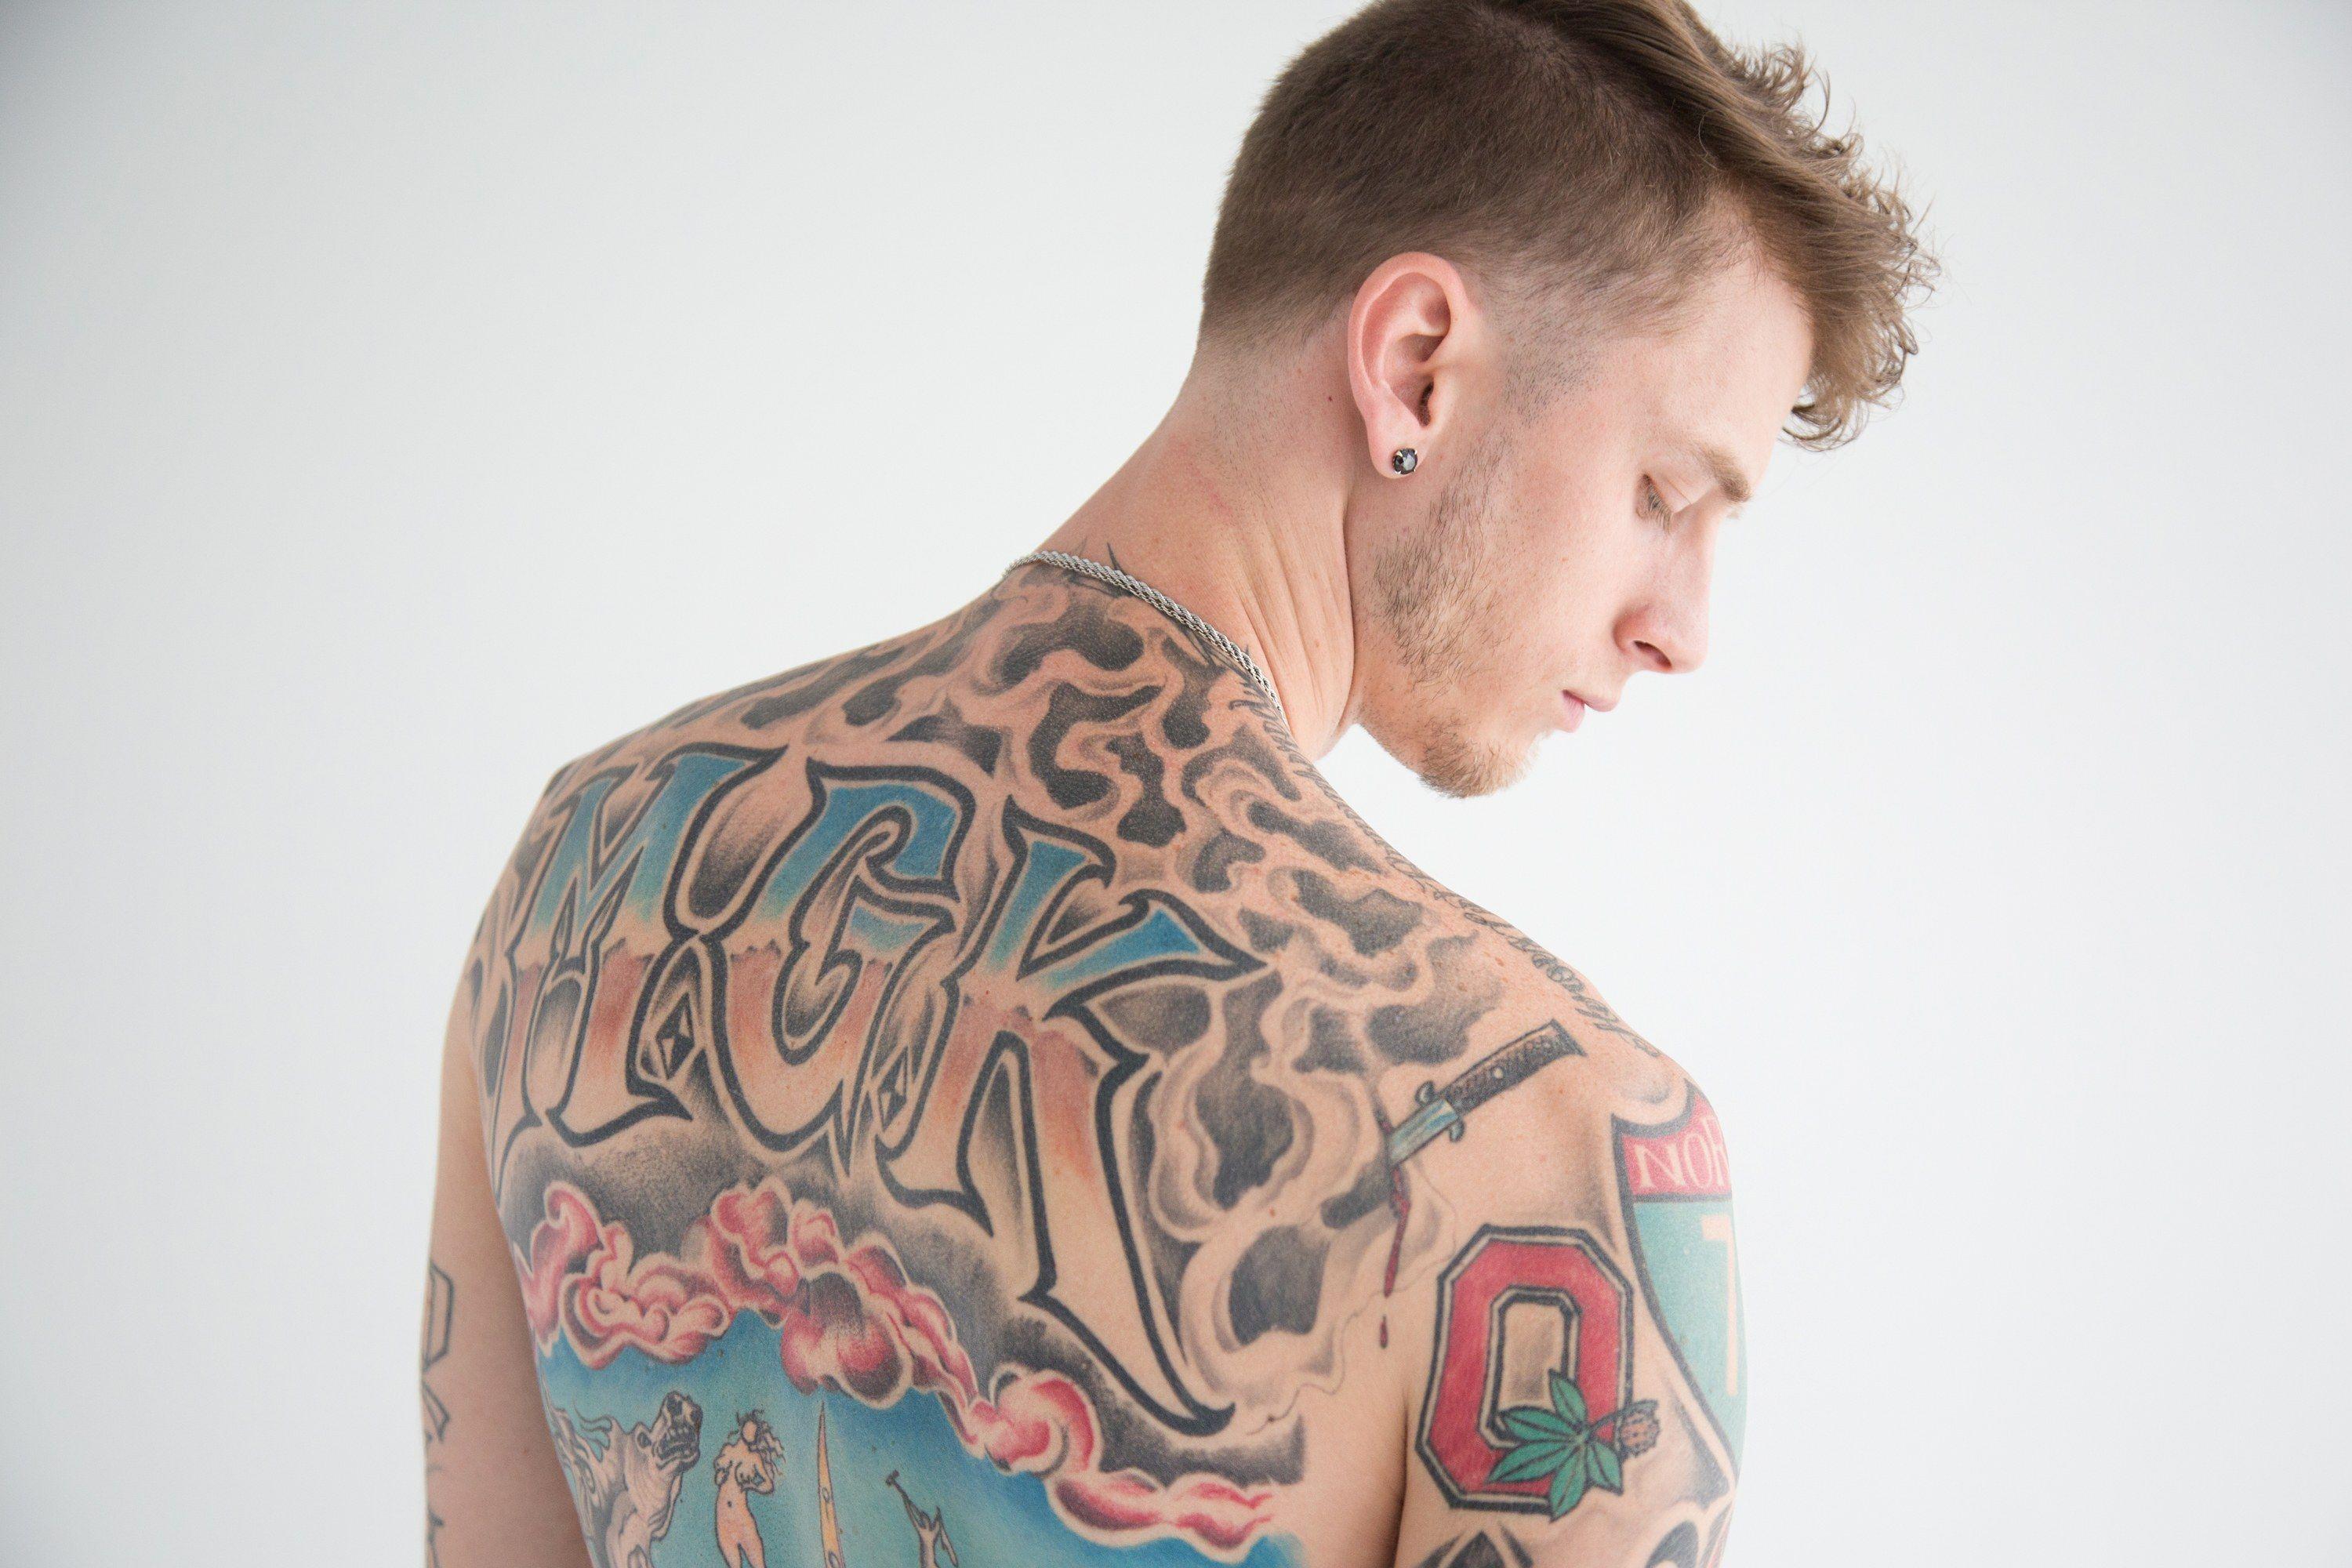 Machine Gun Kelly: The Guy Whose Tattoos You'll Be Seeing Everywhere